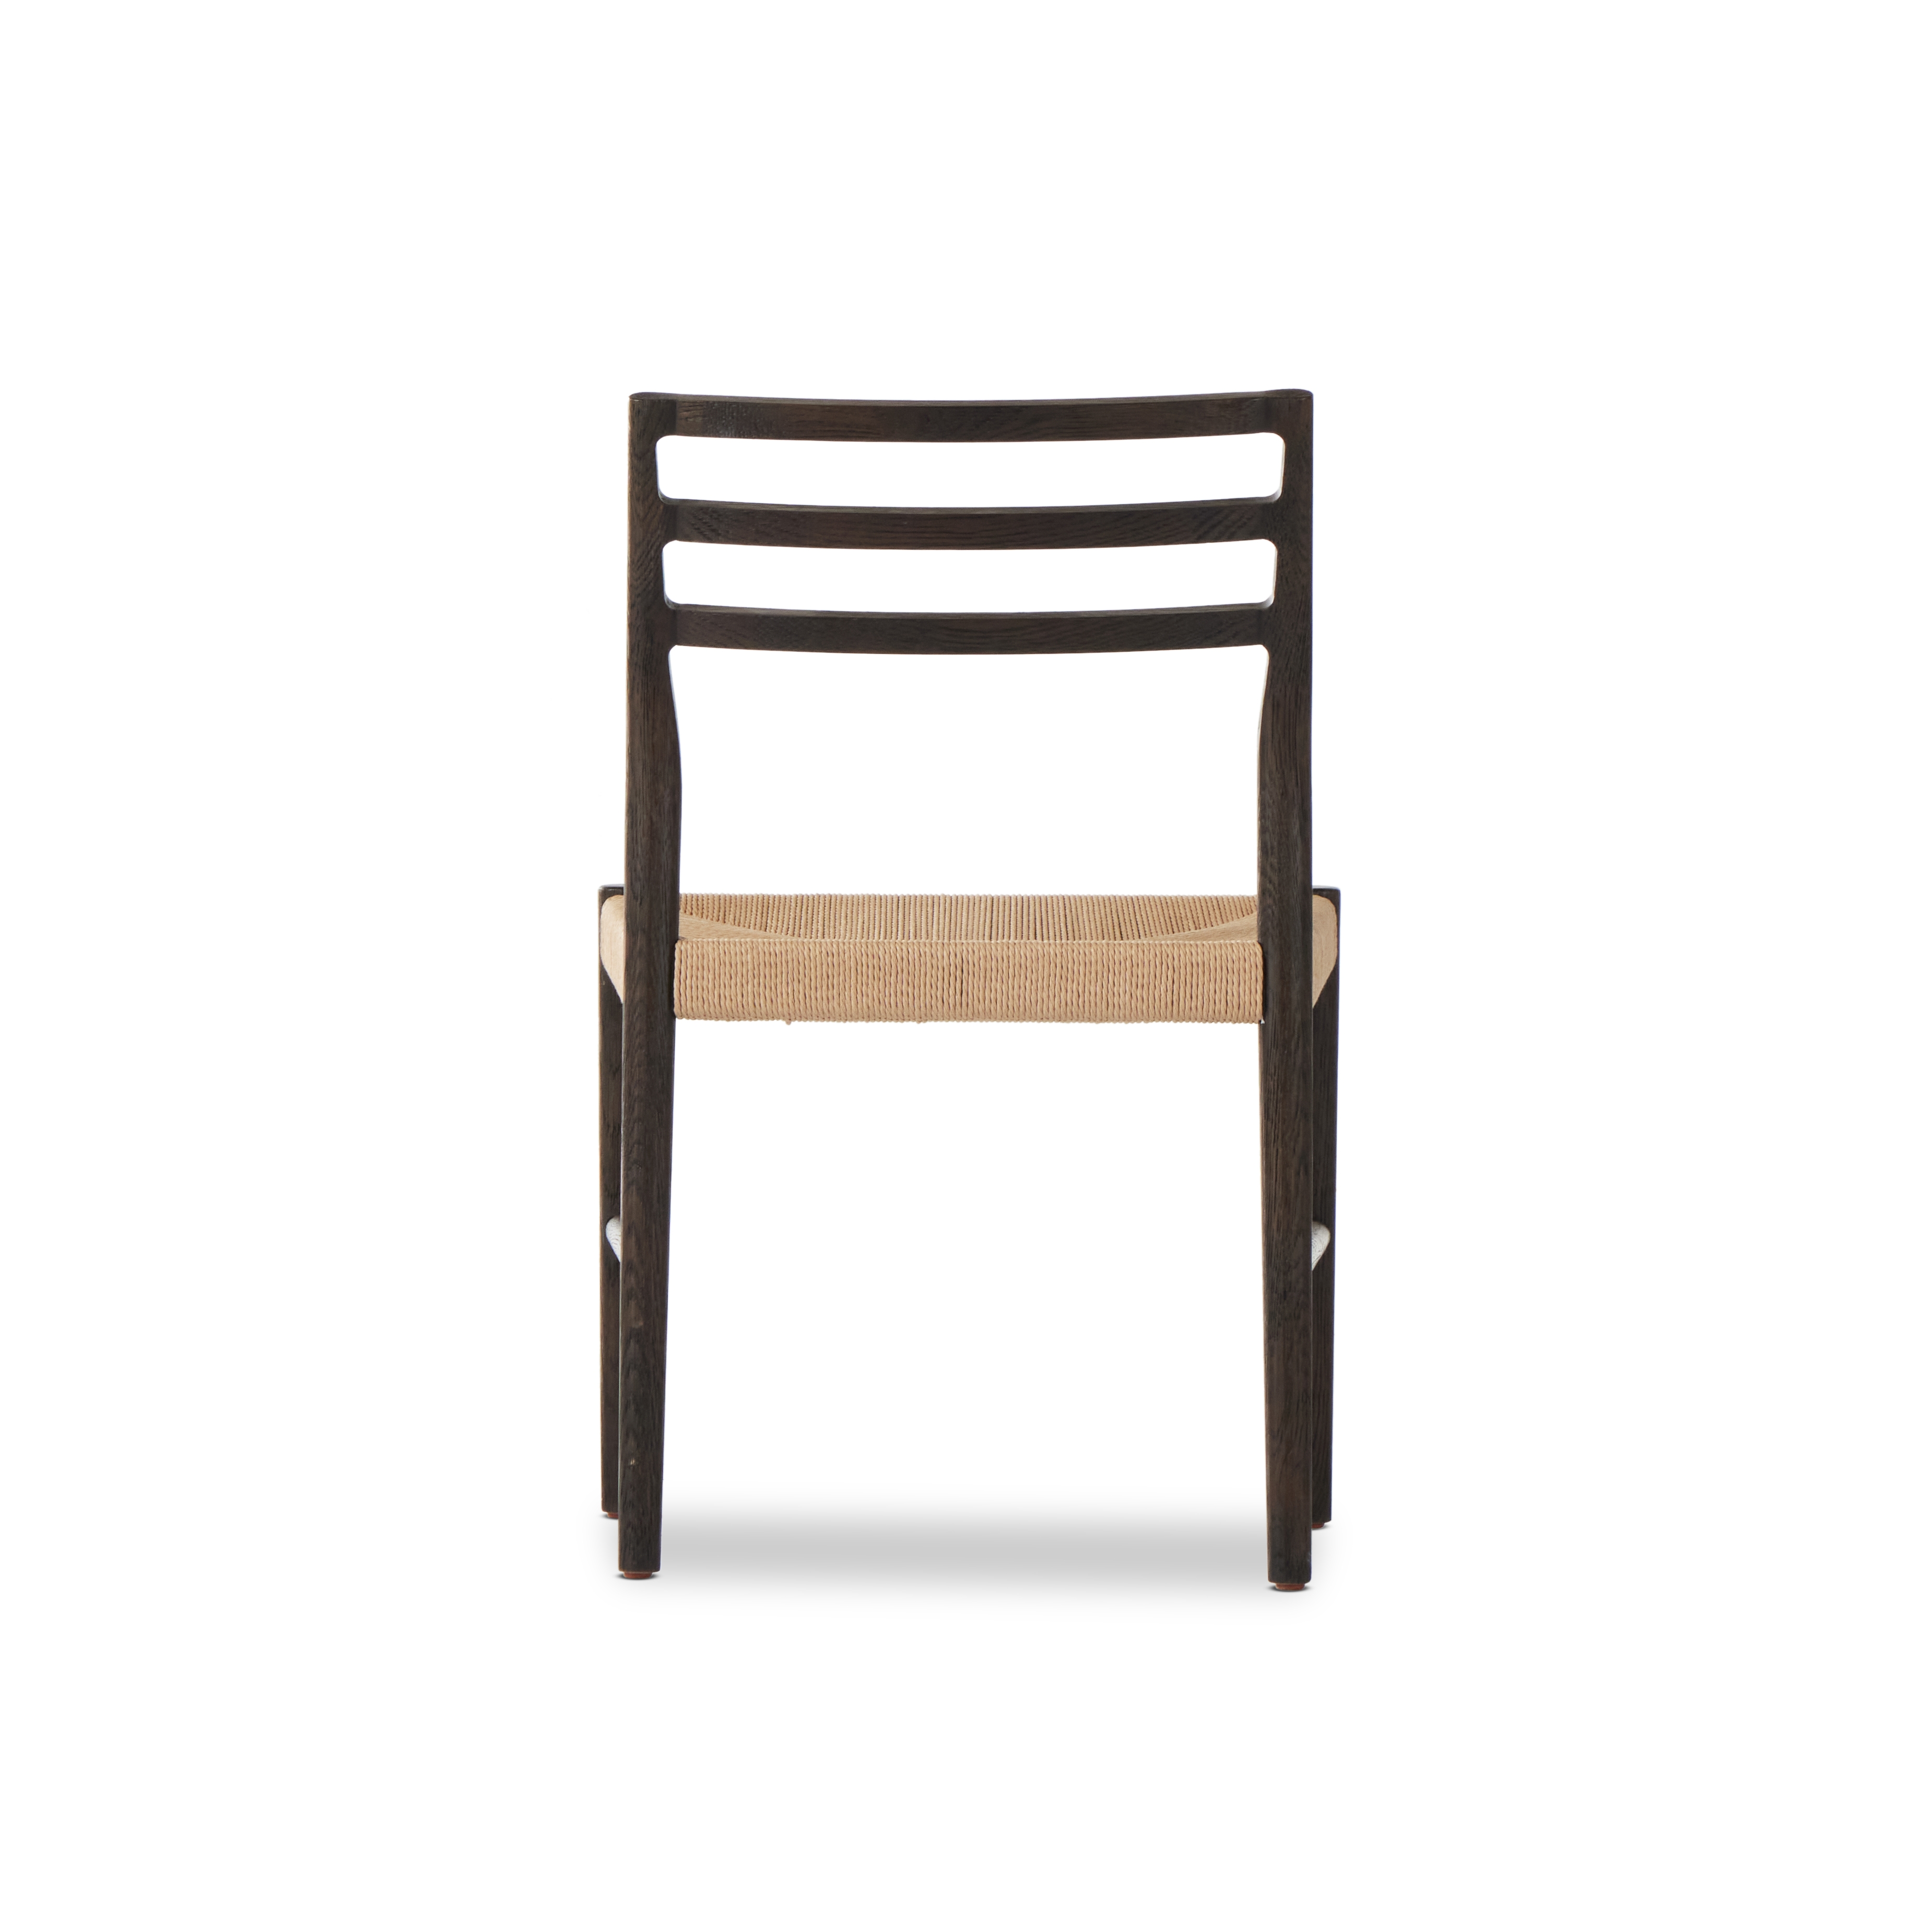 Glenmore Woven Dining Chair-Light Carbon - Image 5